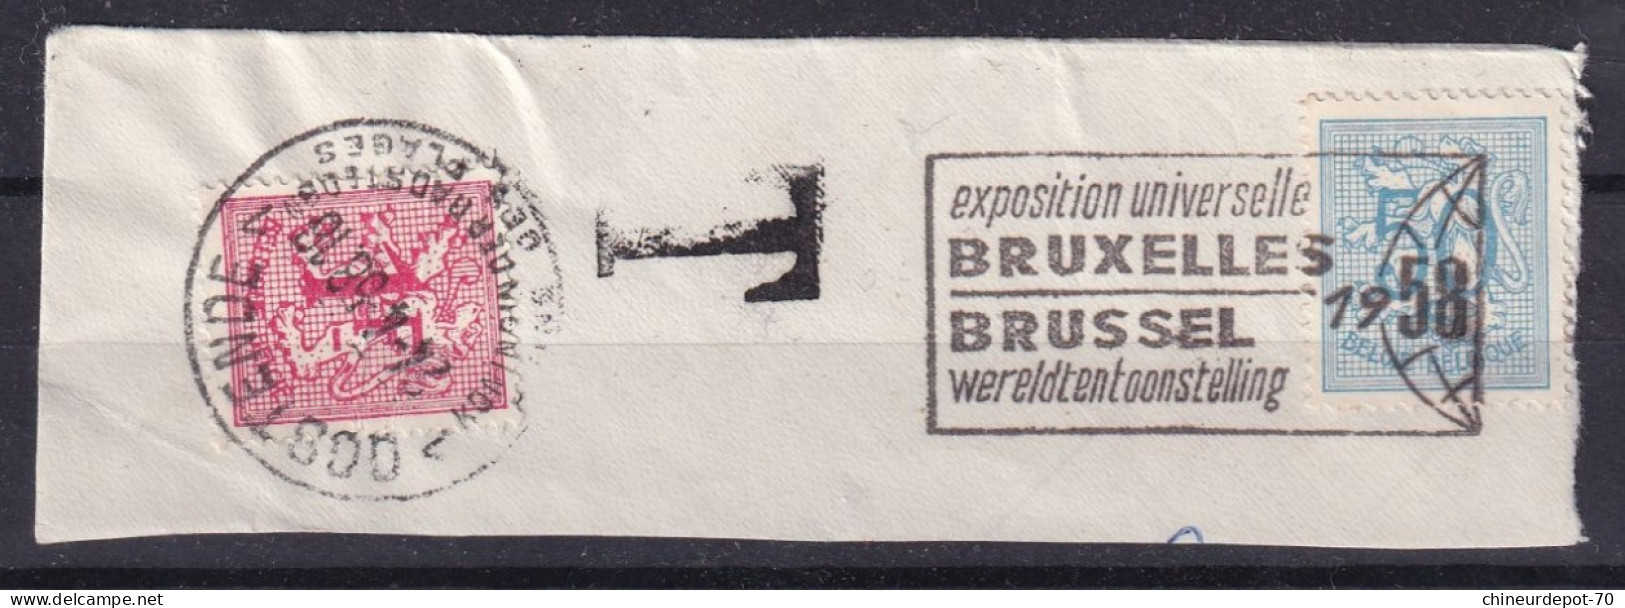 TIMBRES T Taxes CHIFFRES OOSTENDE BRUXELLES EXPOSITION 1958 - Timbres